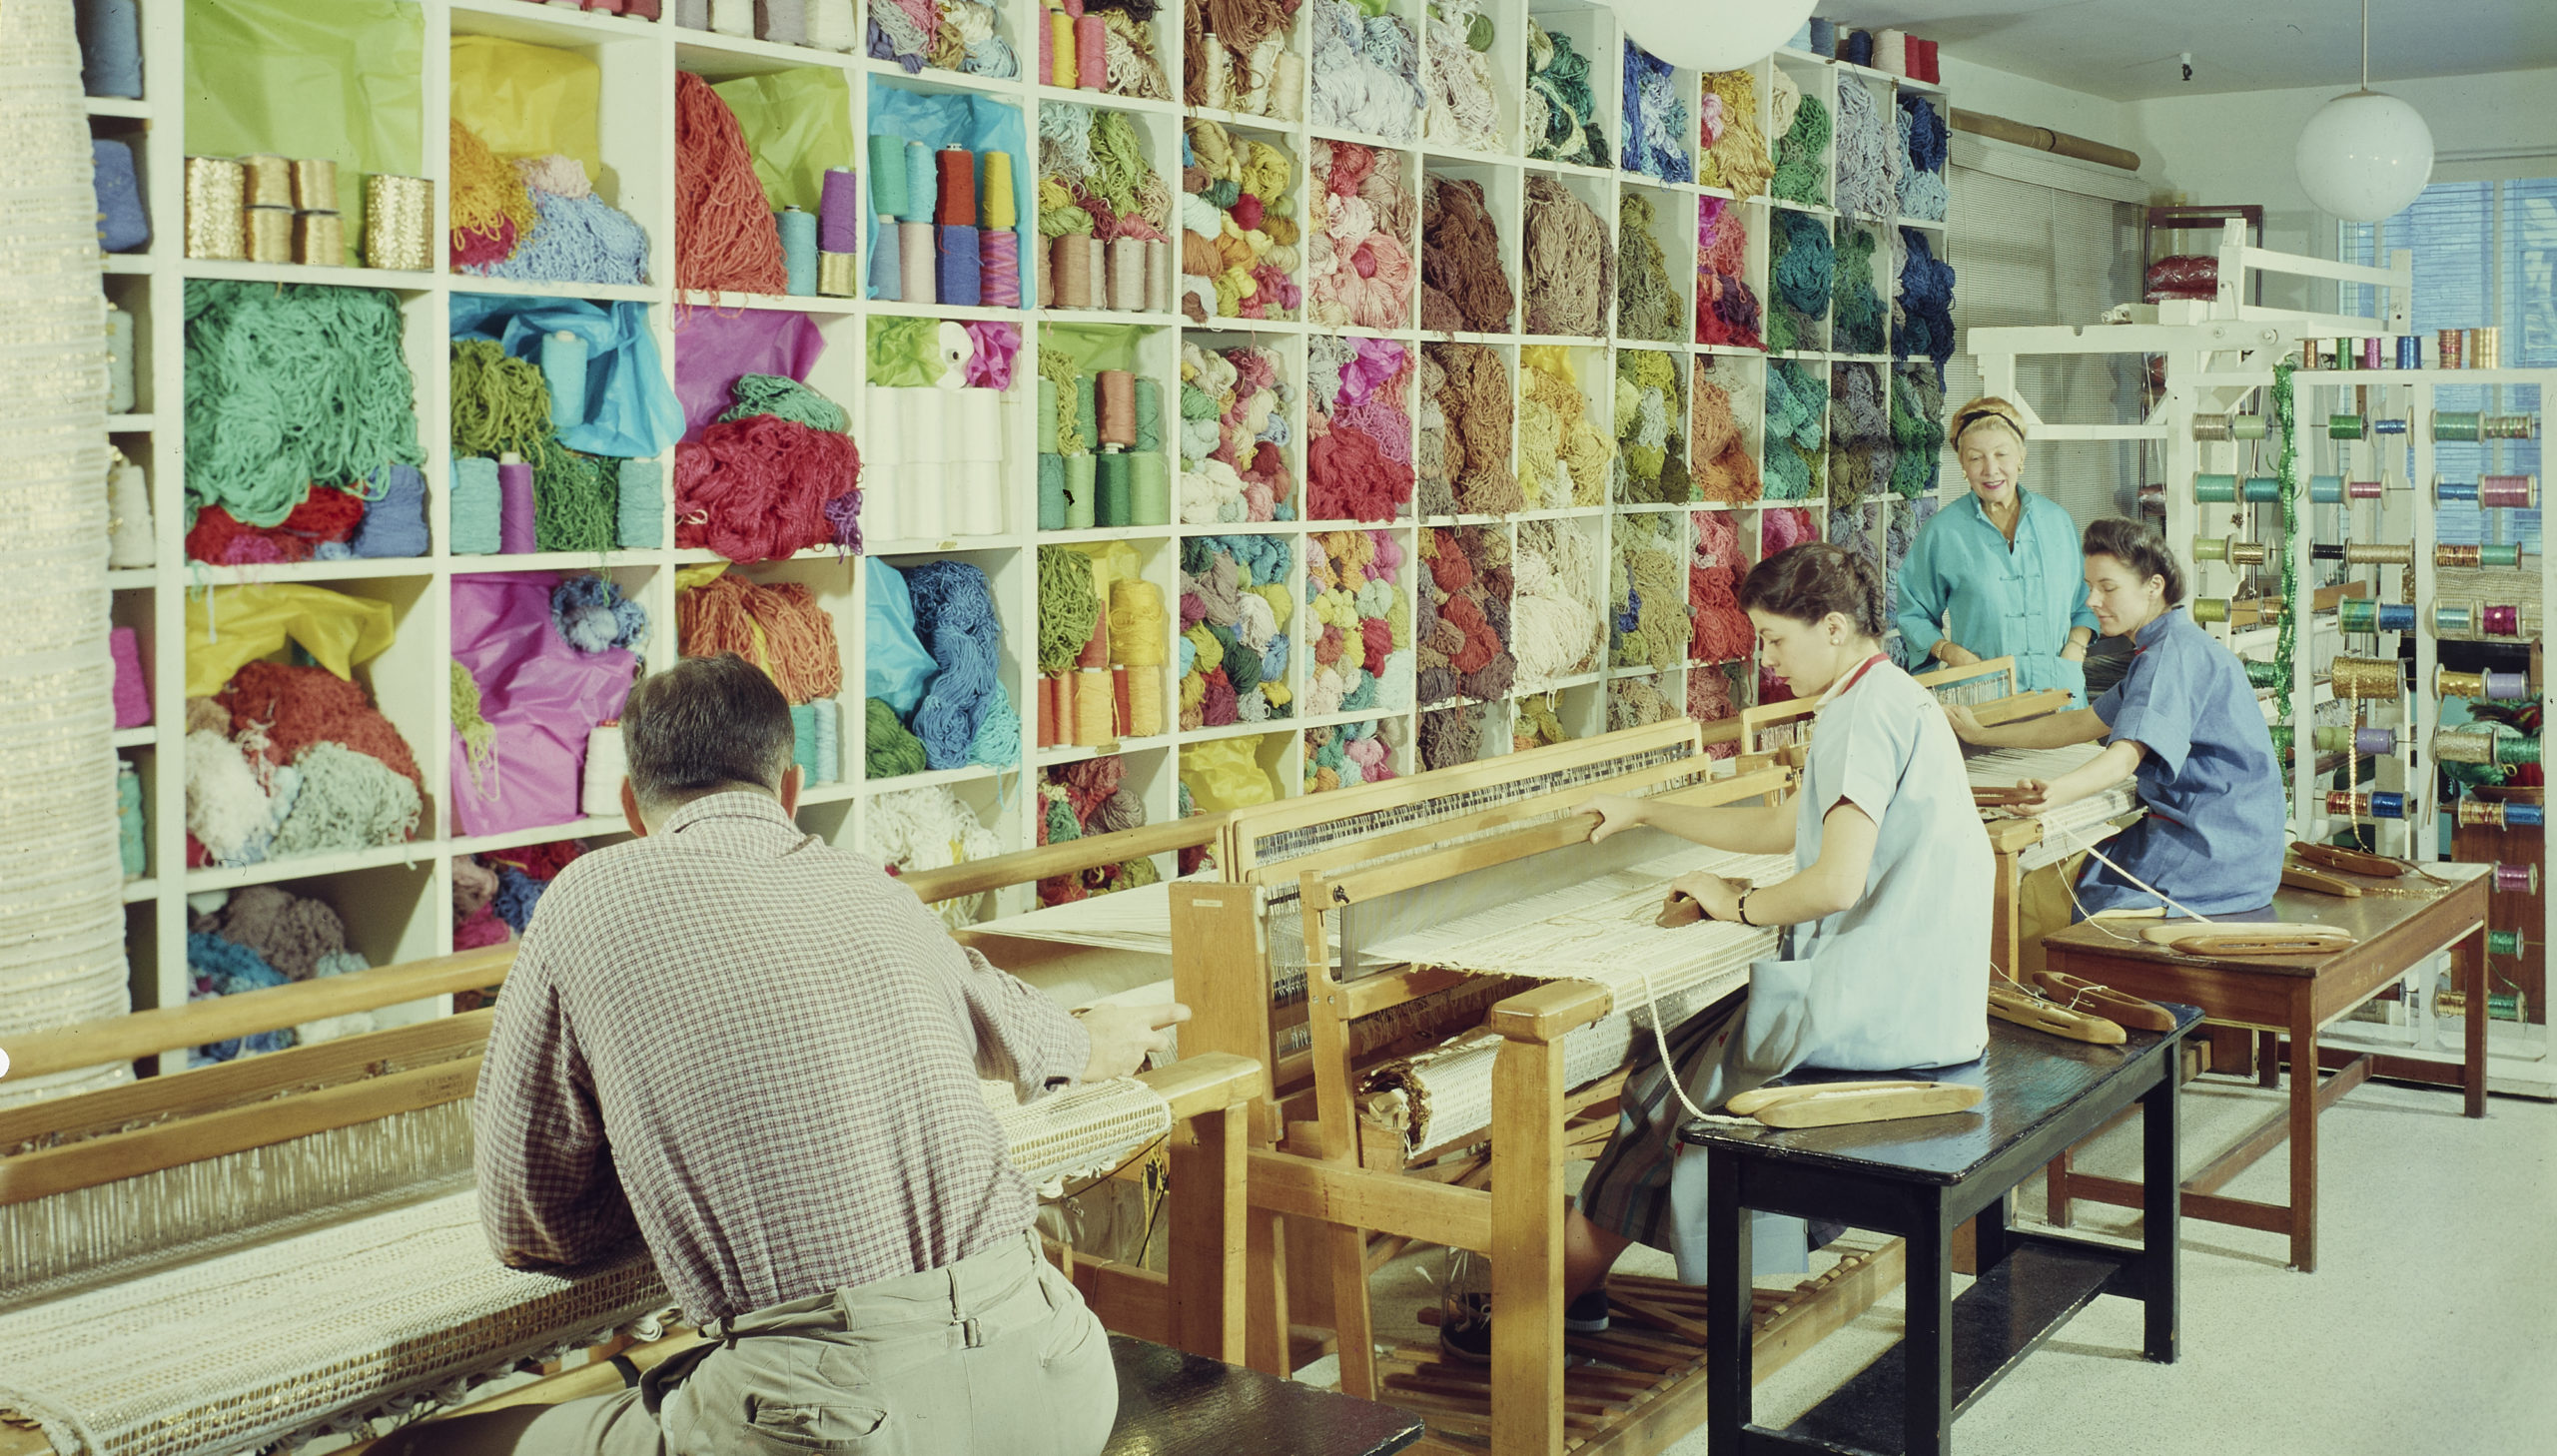 People sit working at large textile looms in front of a high wall of shelves filled to the brim with vibrant and colorful yarn and other kinds of thread; another person stands and watches their work.